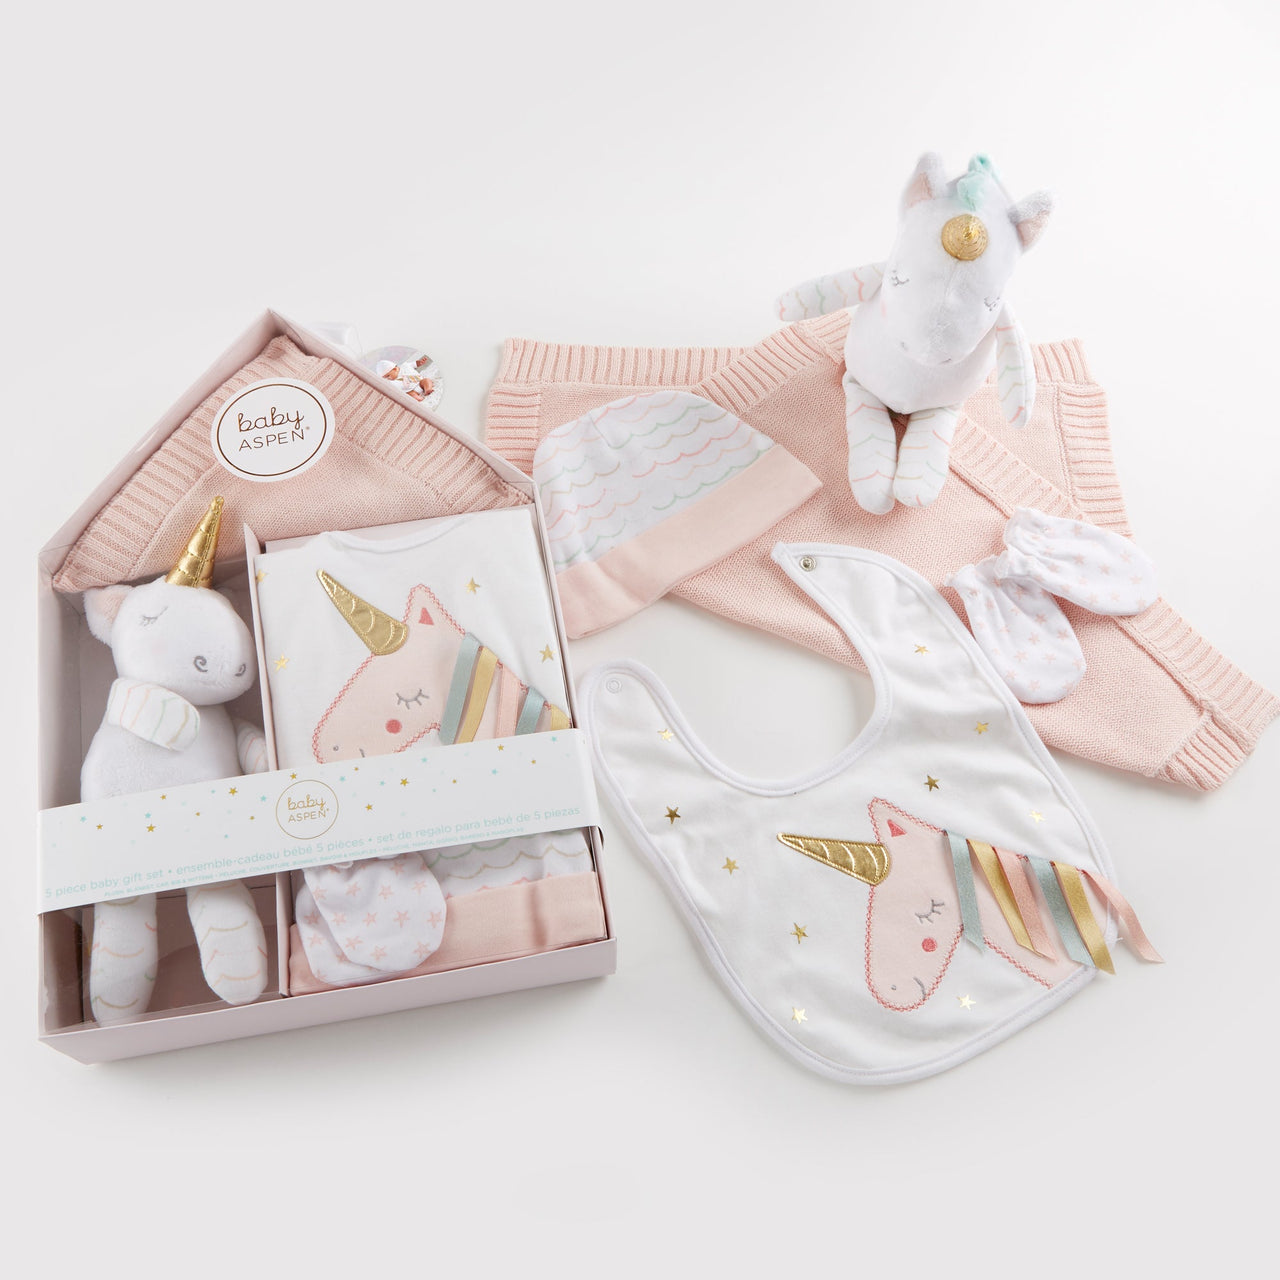 Simply Enchanted Unicorn 5-Piece Welcome Home Gift Set